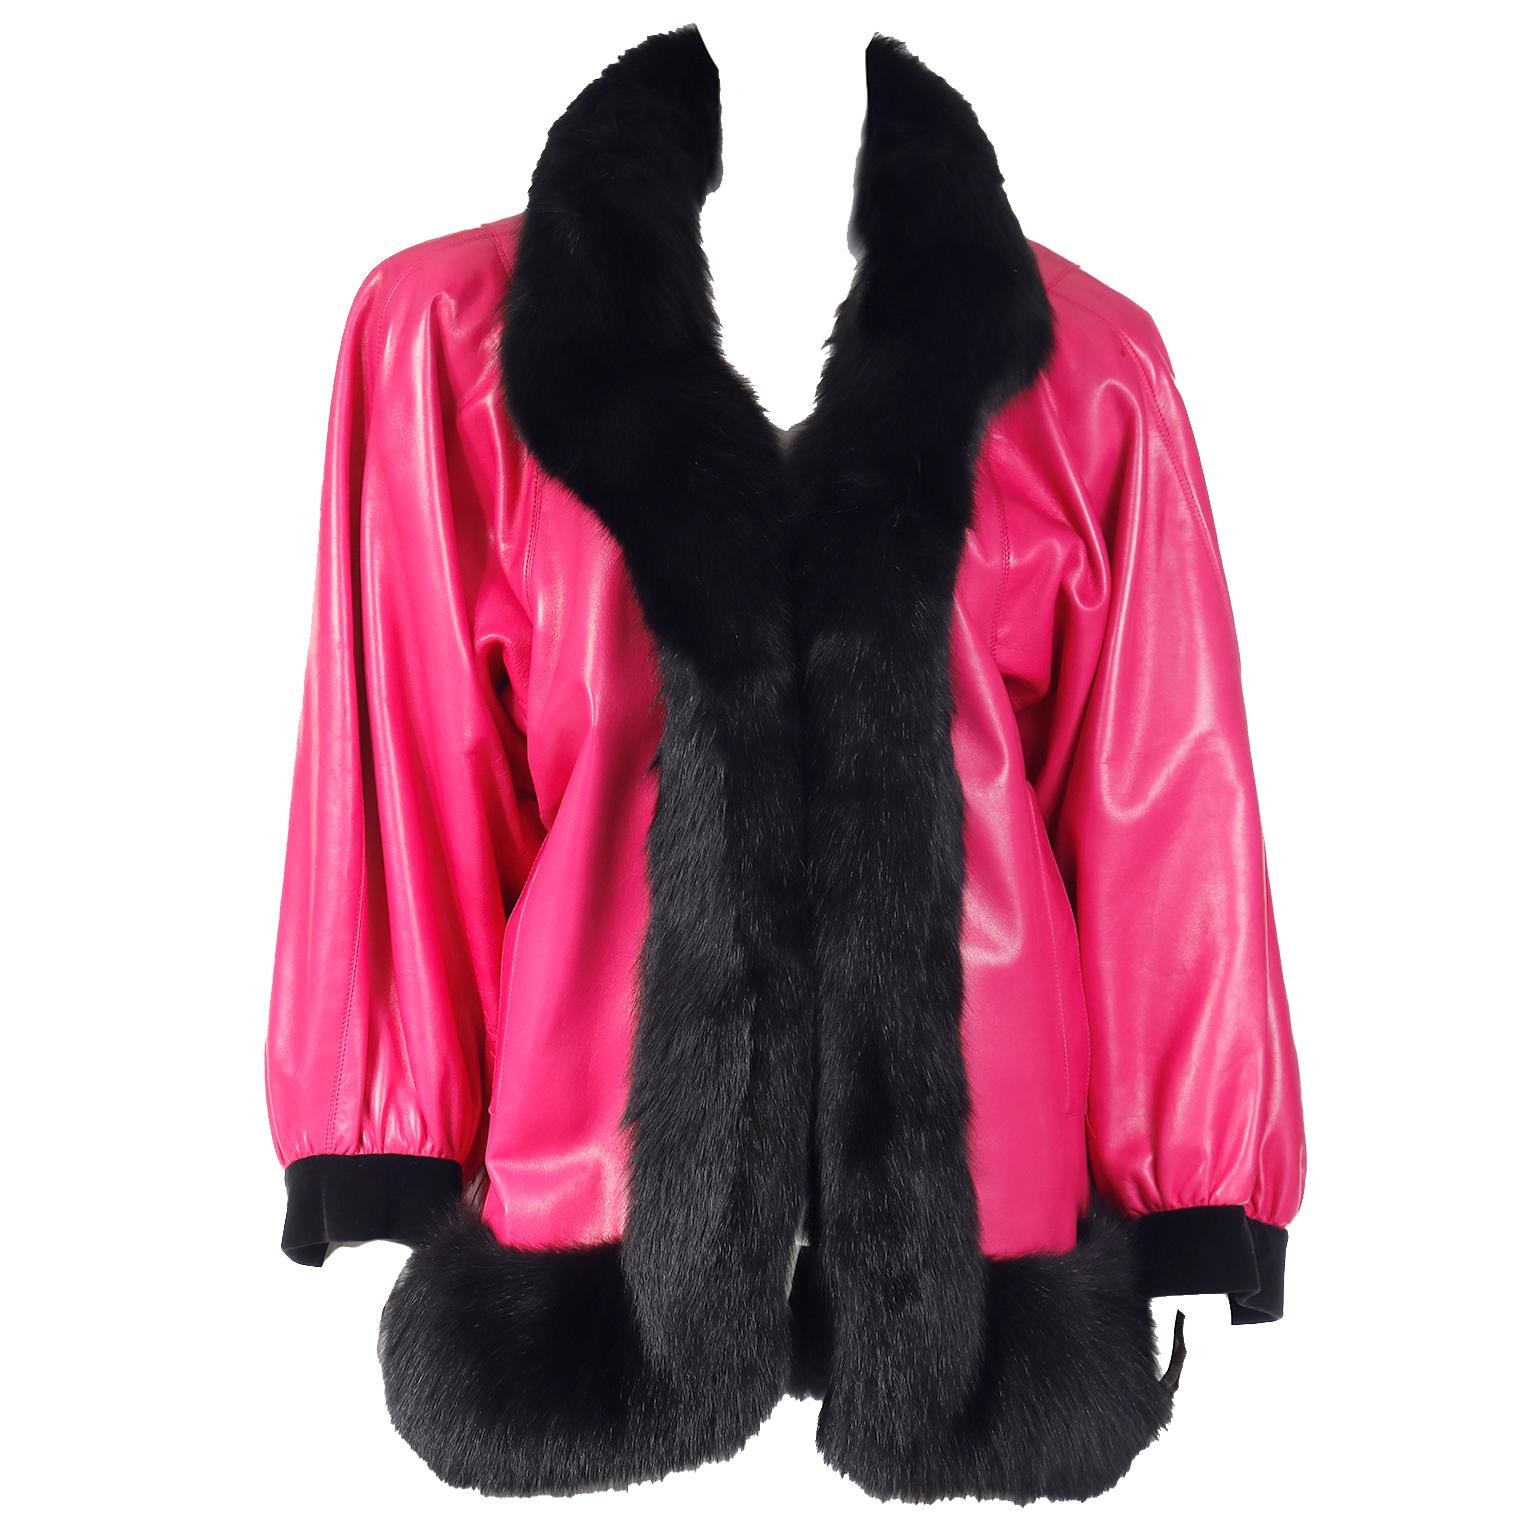 1987 Yves Saint Laurent Runway Haute Couture Pink Leather Jacket w Black Fur For Sale 7